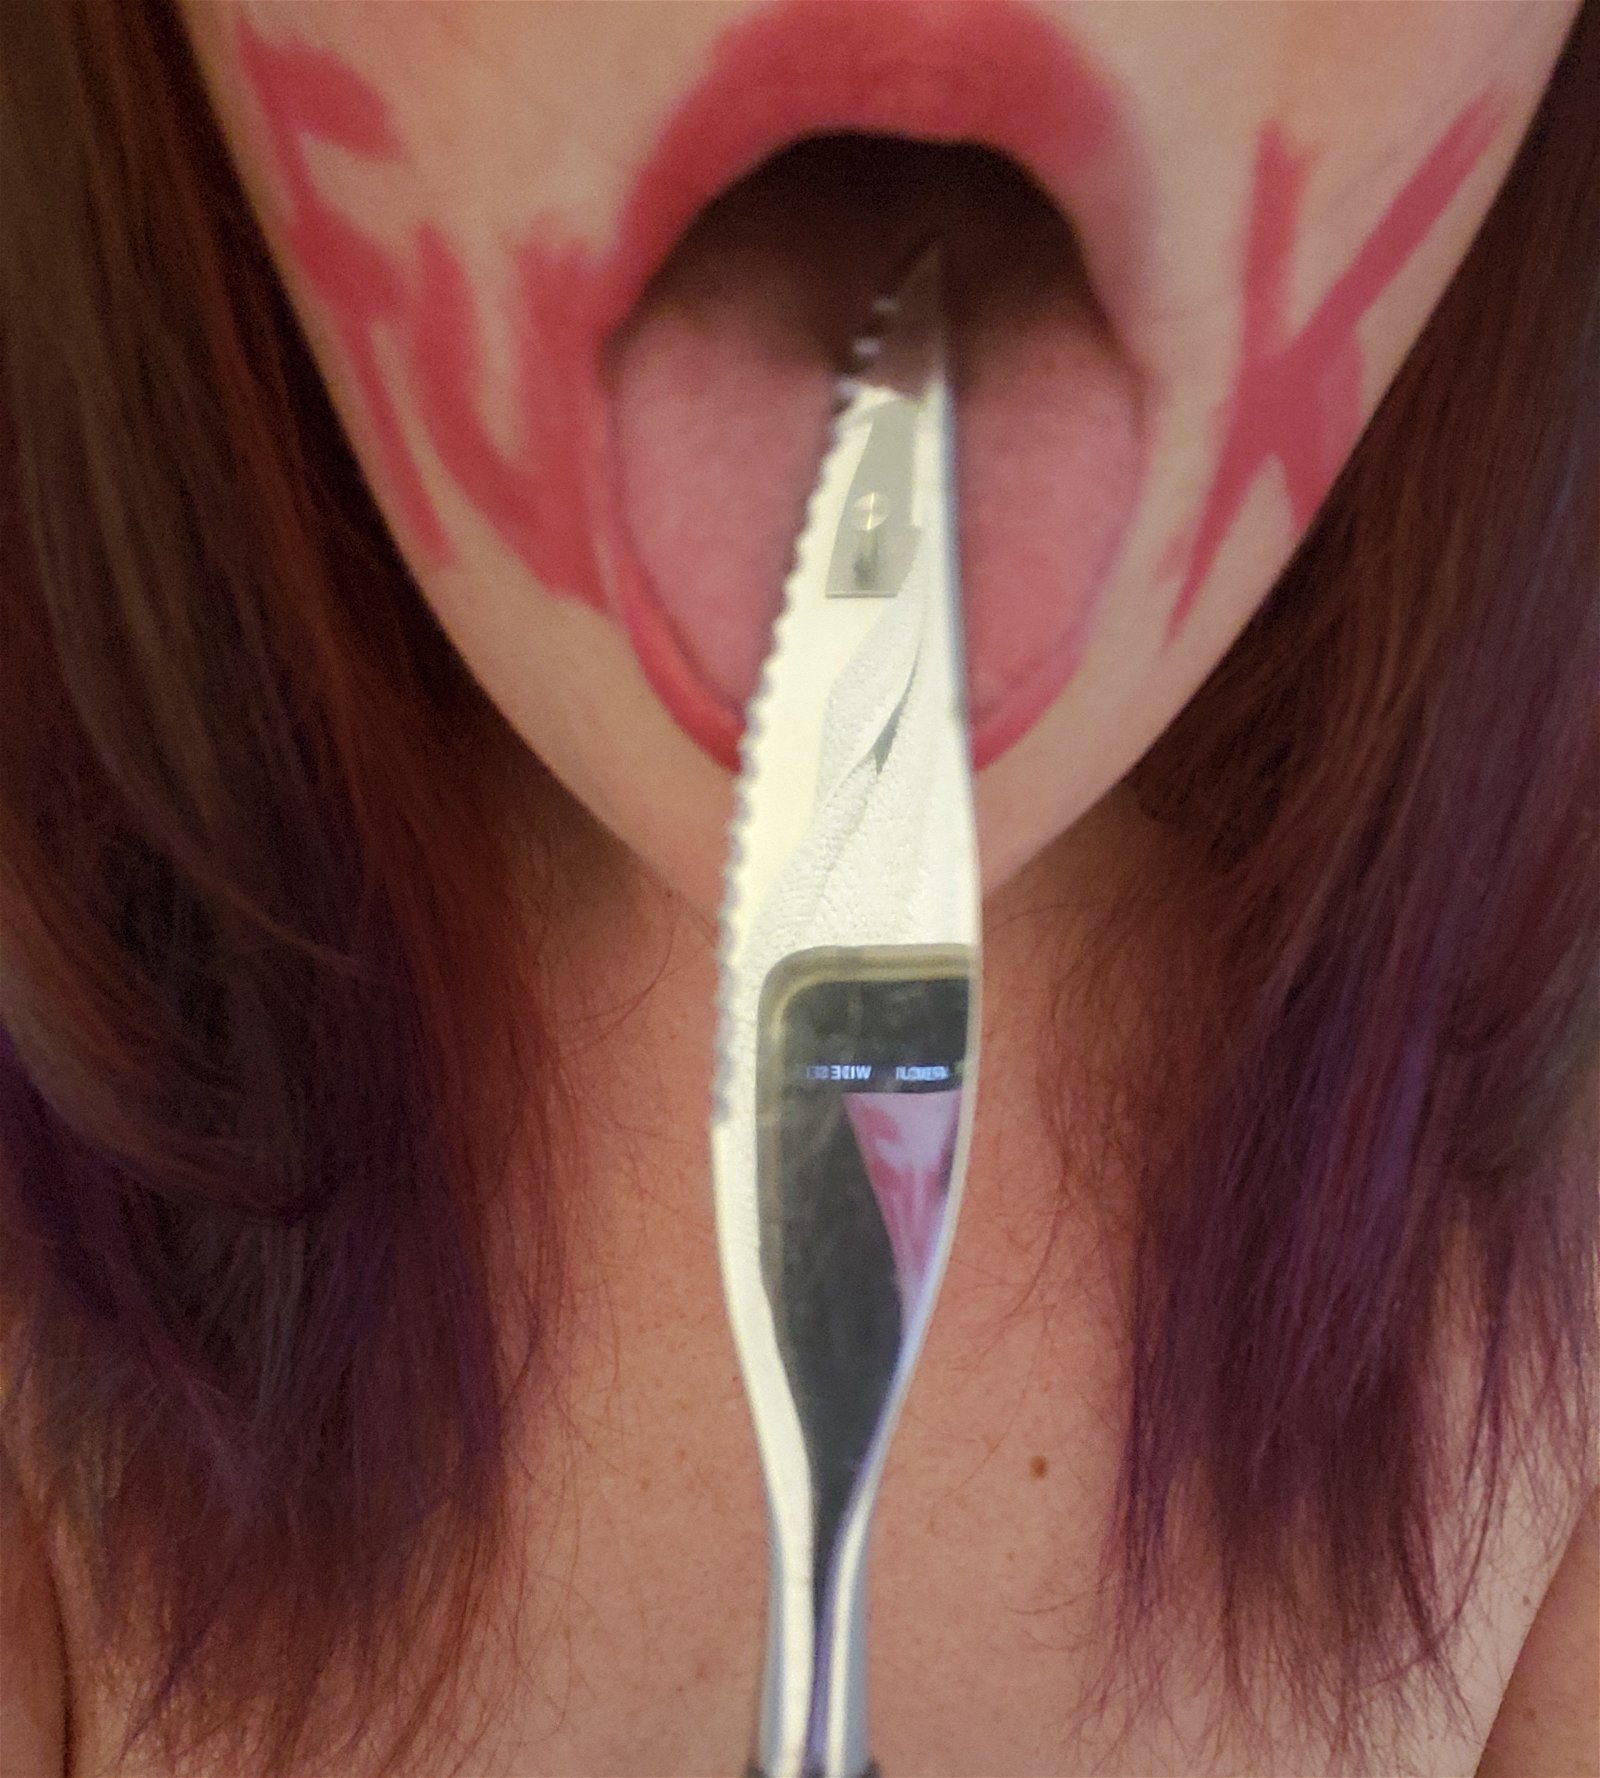 Photo by CurvyGingrrr with the username @CurvyGingrrr, who is a verified user,  January 3, 2019 at 8:57 AM and the text says 'I Like to call this the F photoset 💋🔪
#fuck #fuckit #fuckmyface #fuckme #fuckbabygirl'